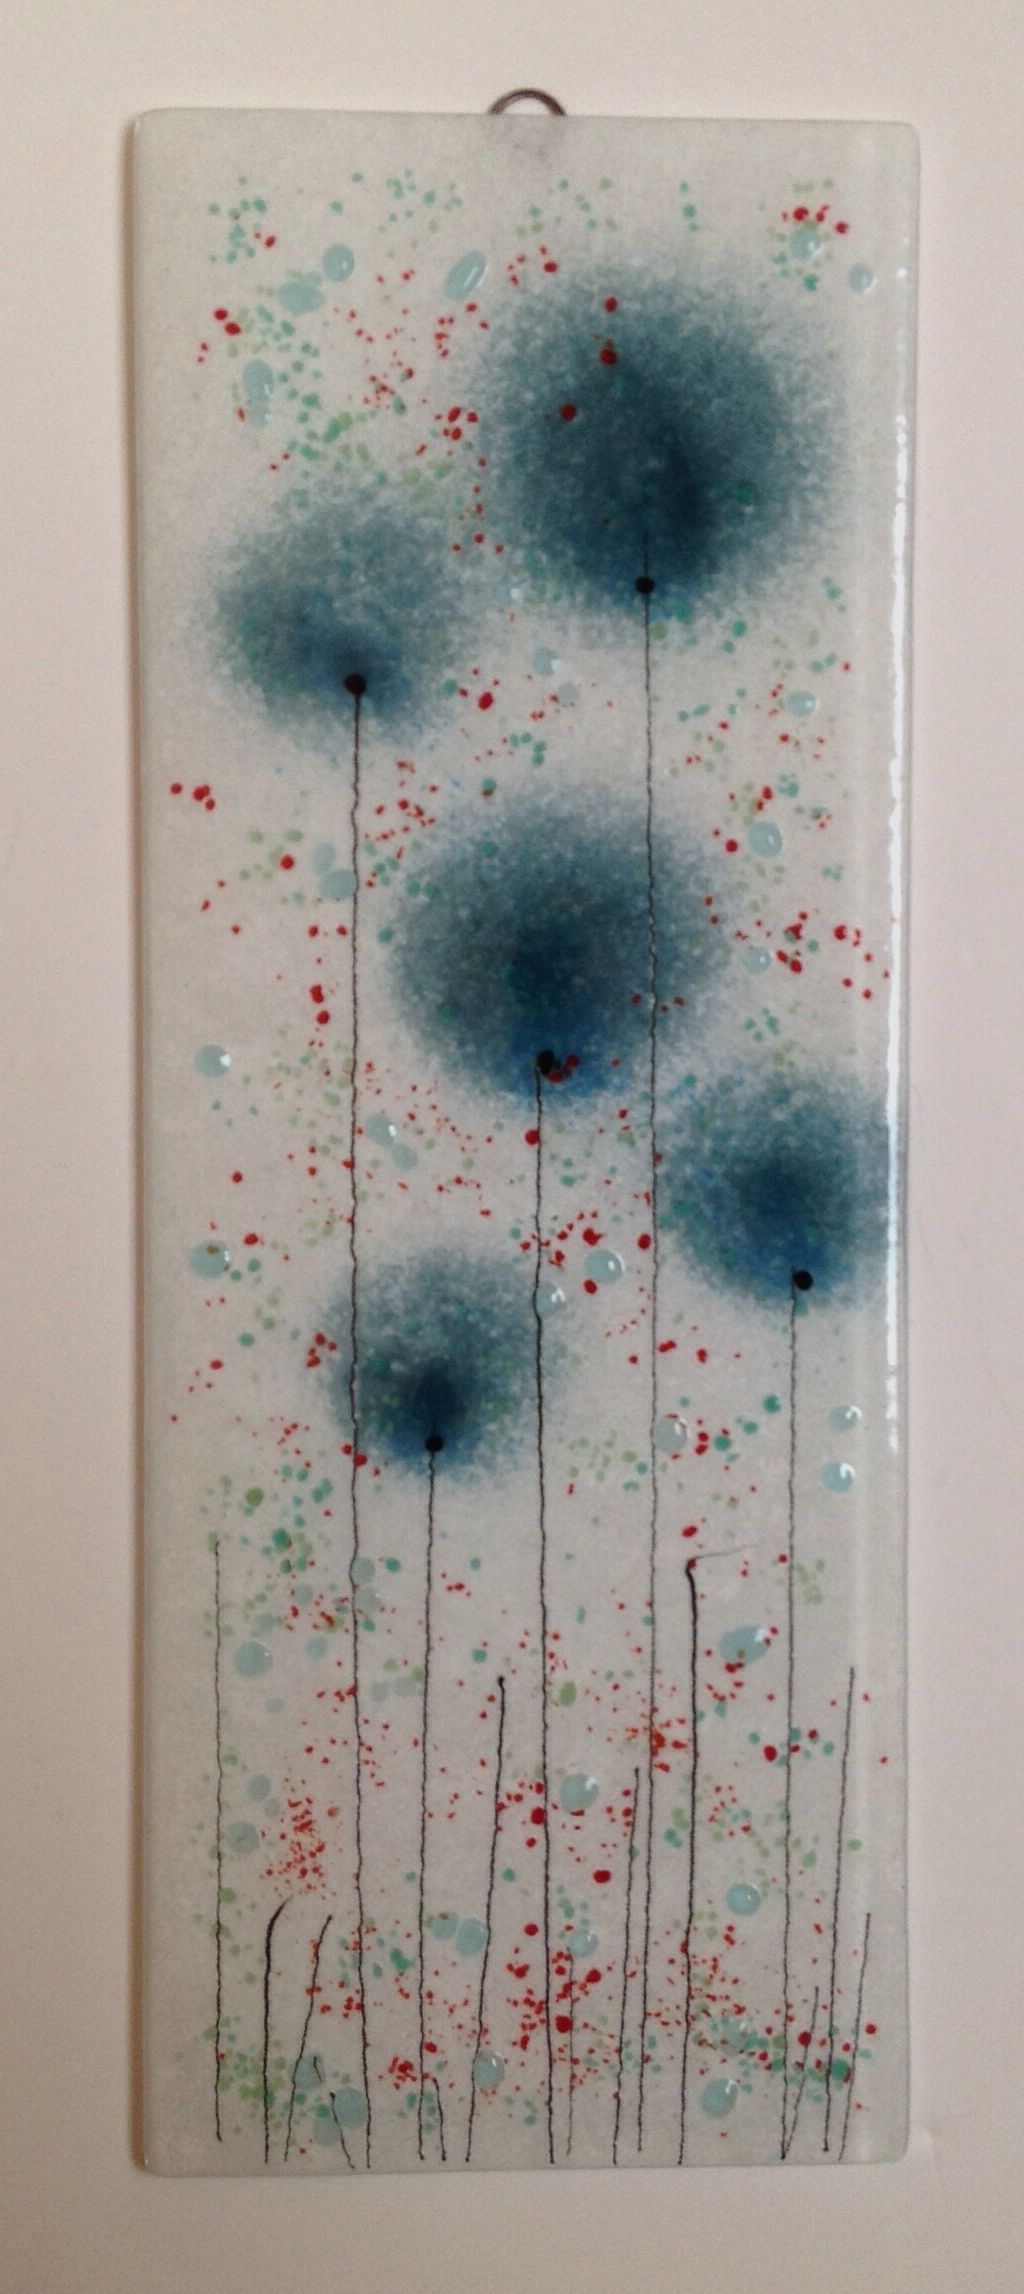 Most Popular Fused Glass Panel Wall Art #artglass #fusedglass Www Intended For Contemporary Fused Glass Wall Art (View 11 of 15)